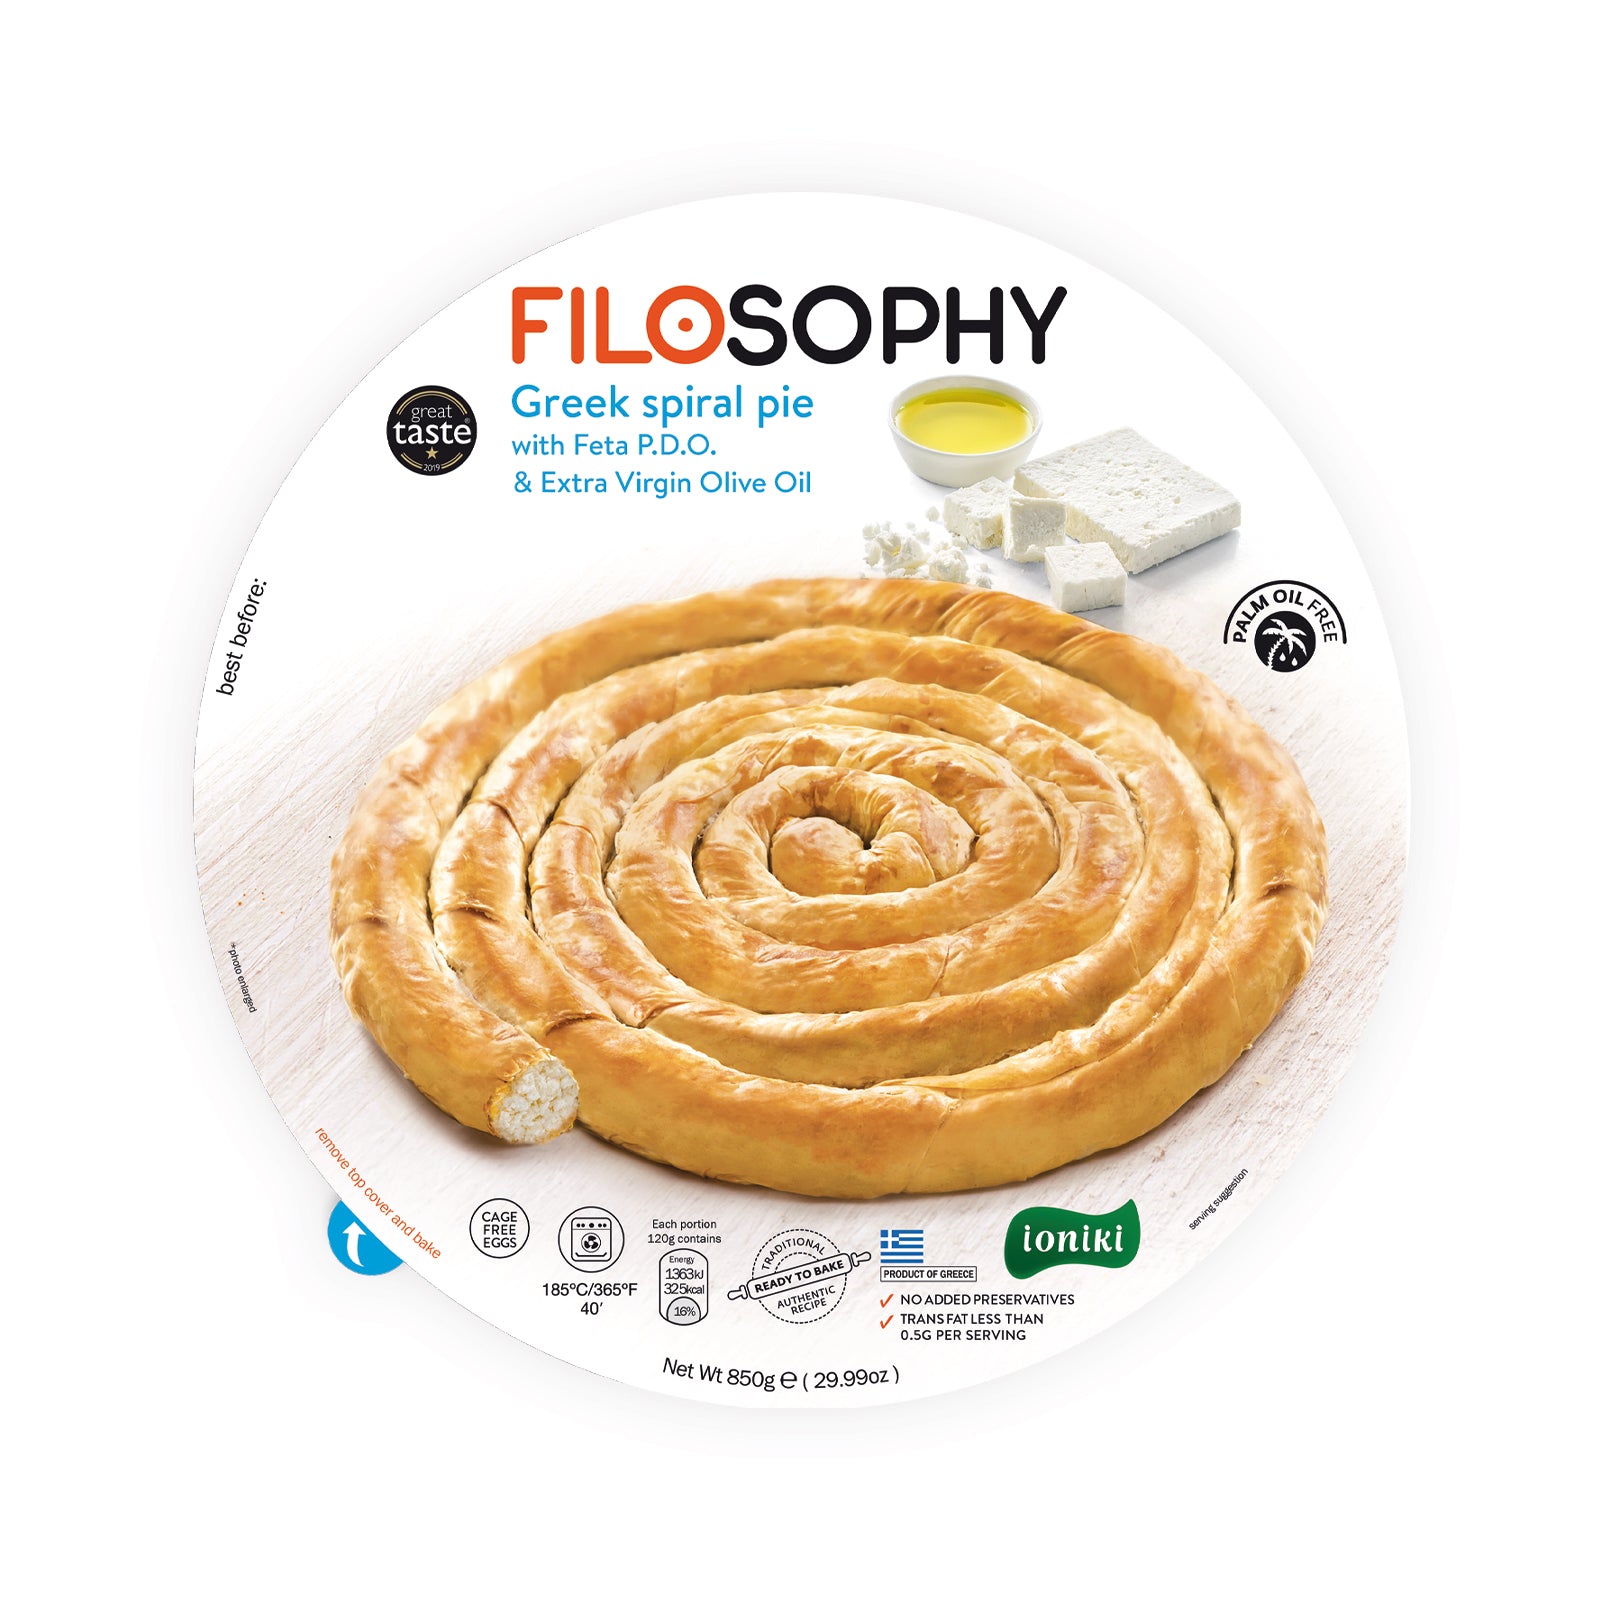 Spiral Pie with Feta Cheese